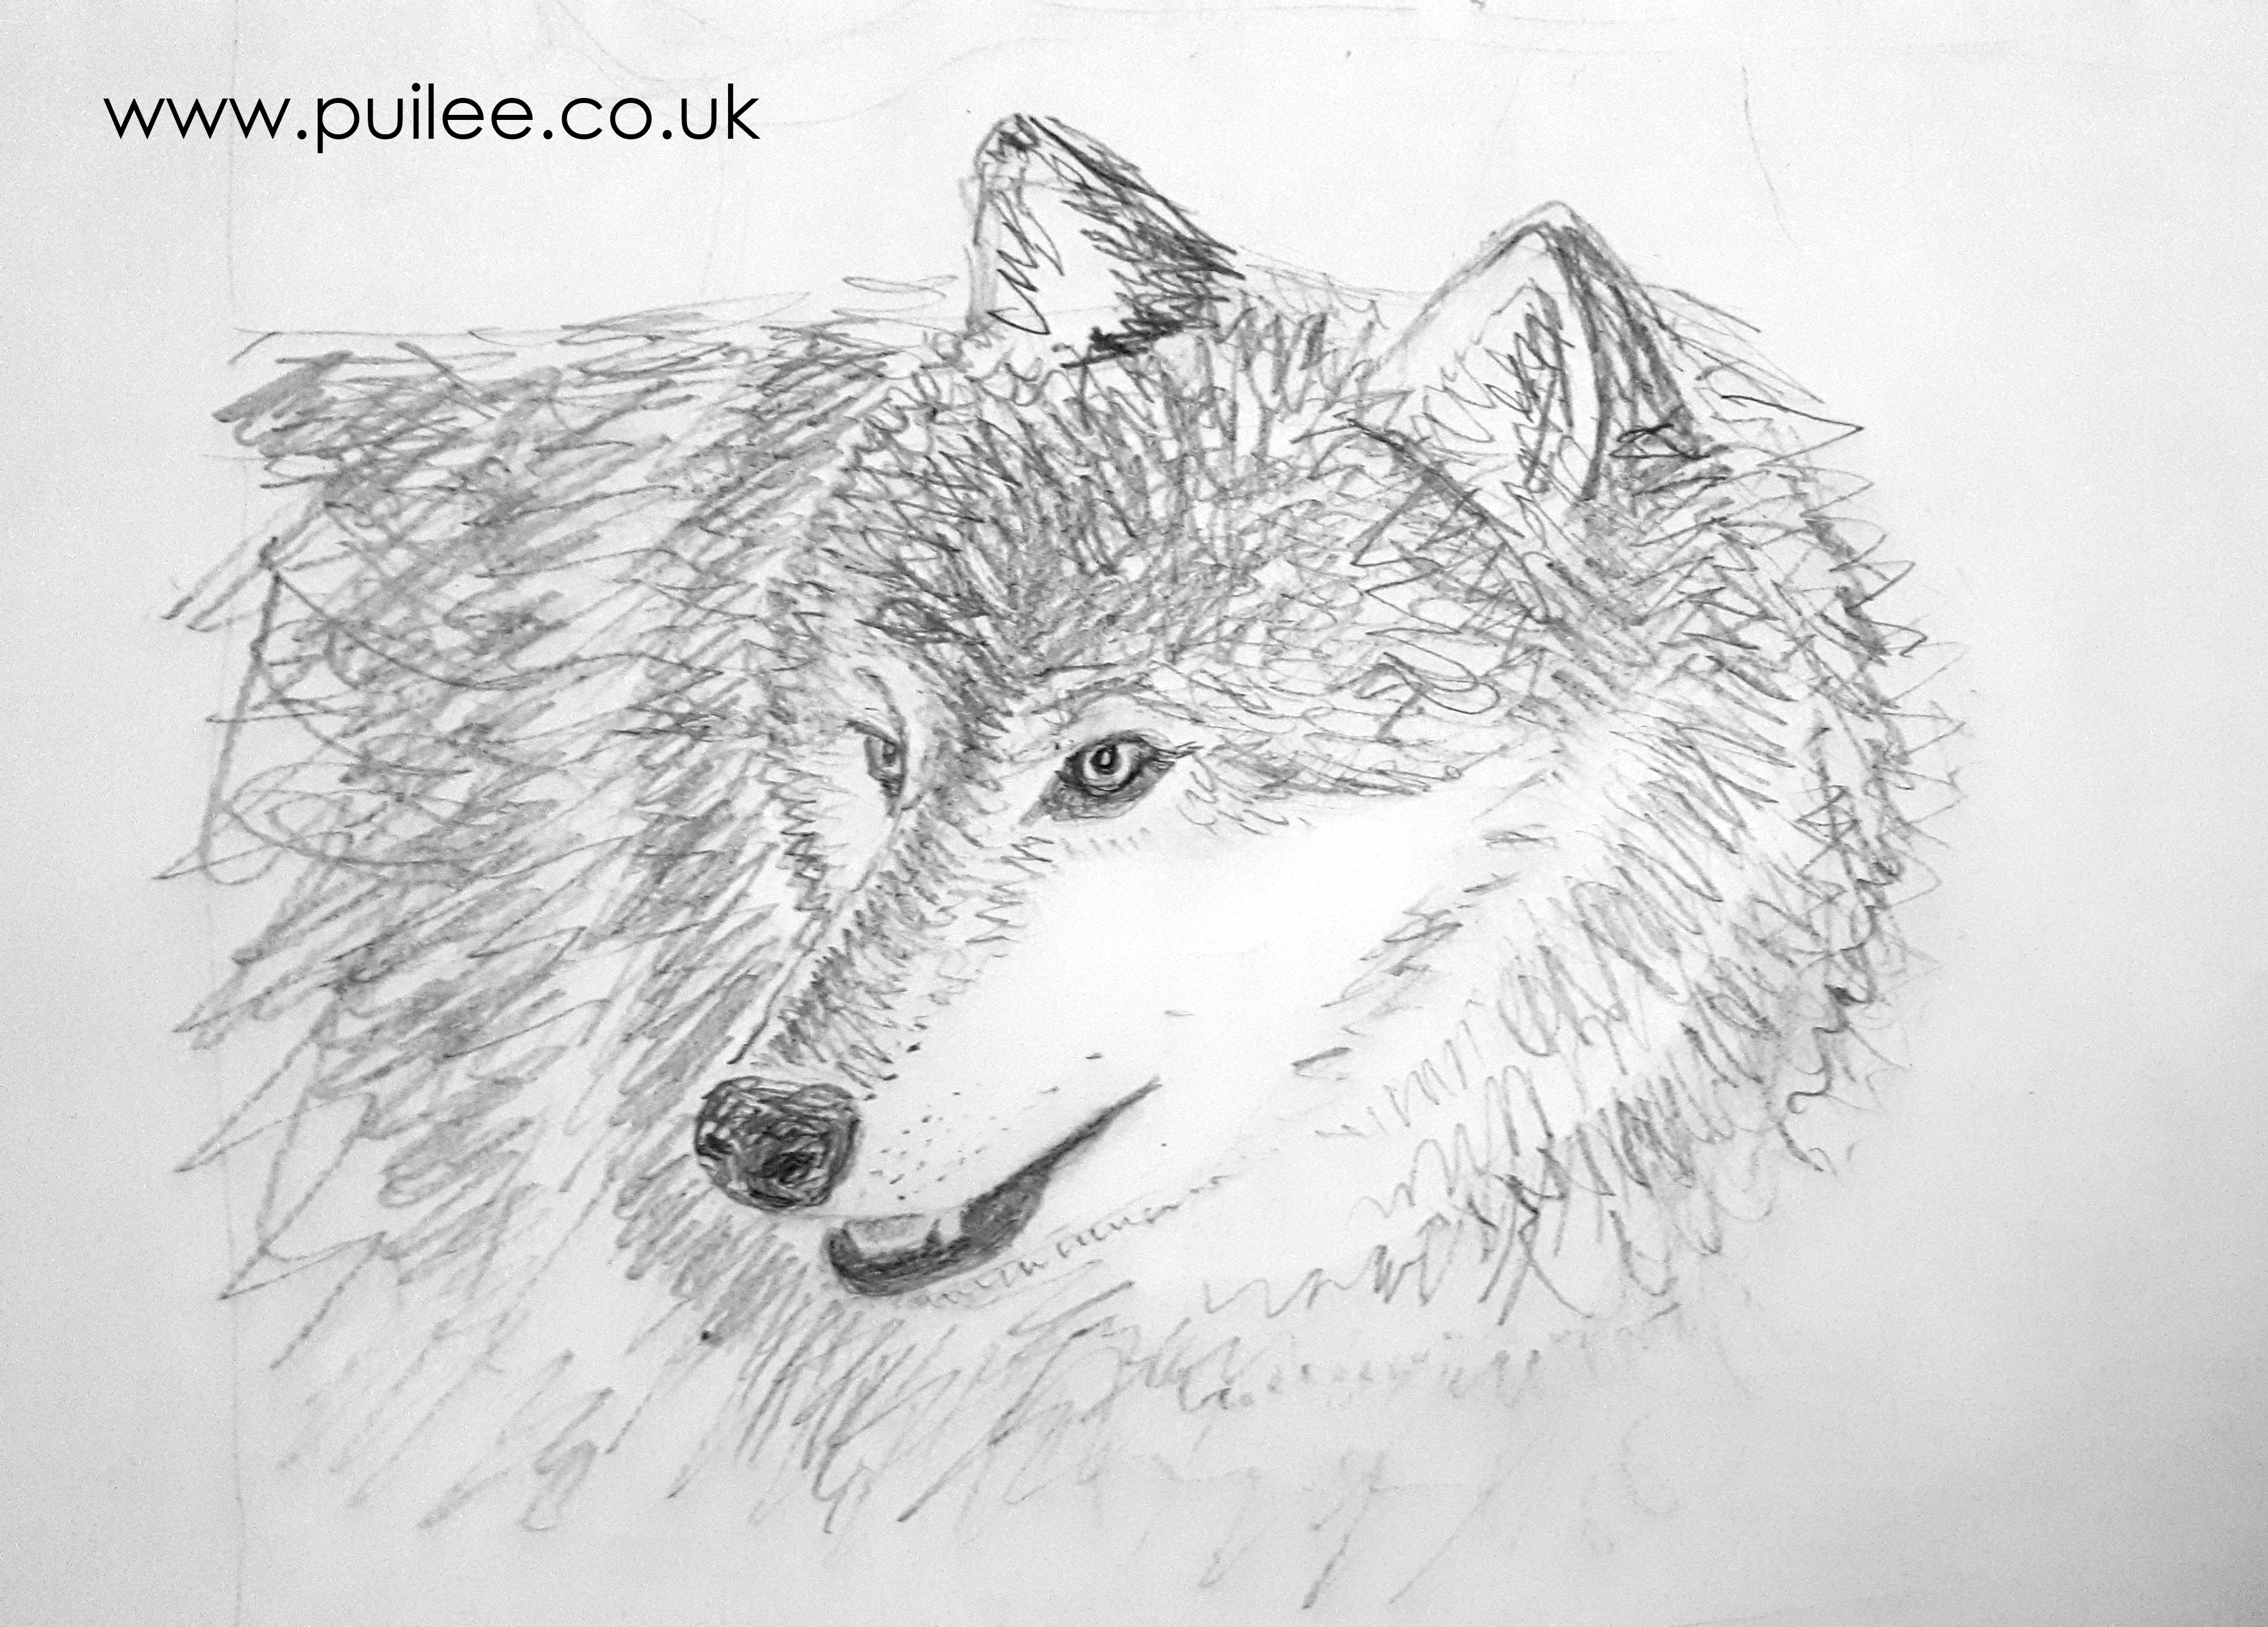 Wolf (ii) (2020) pencil on paper - by artist Pui Lee